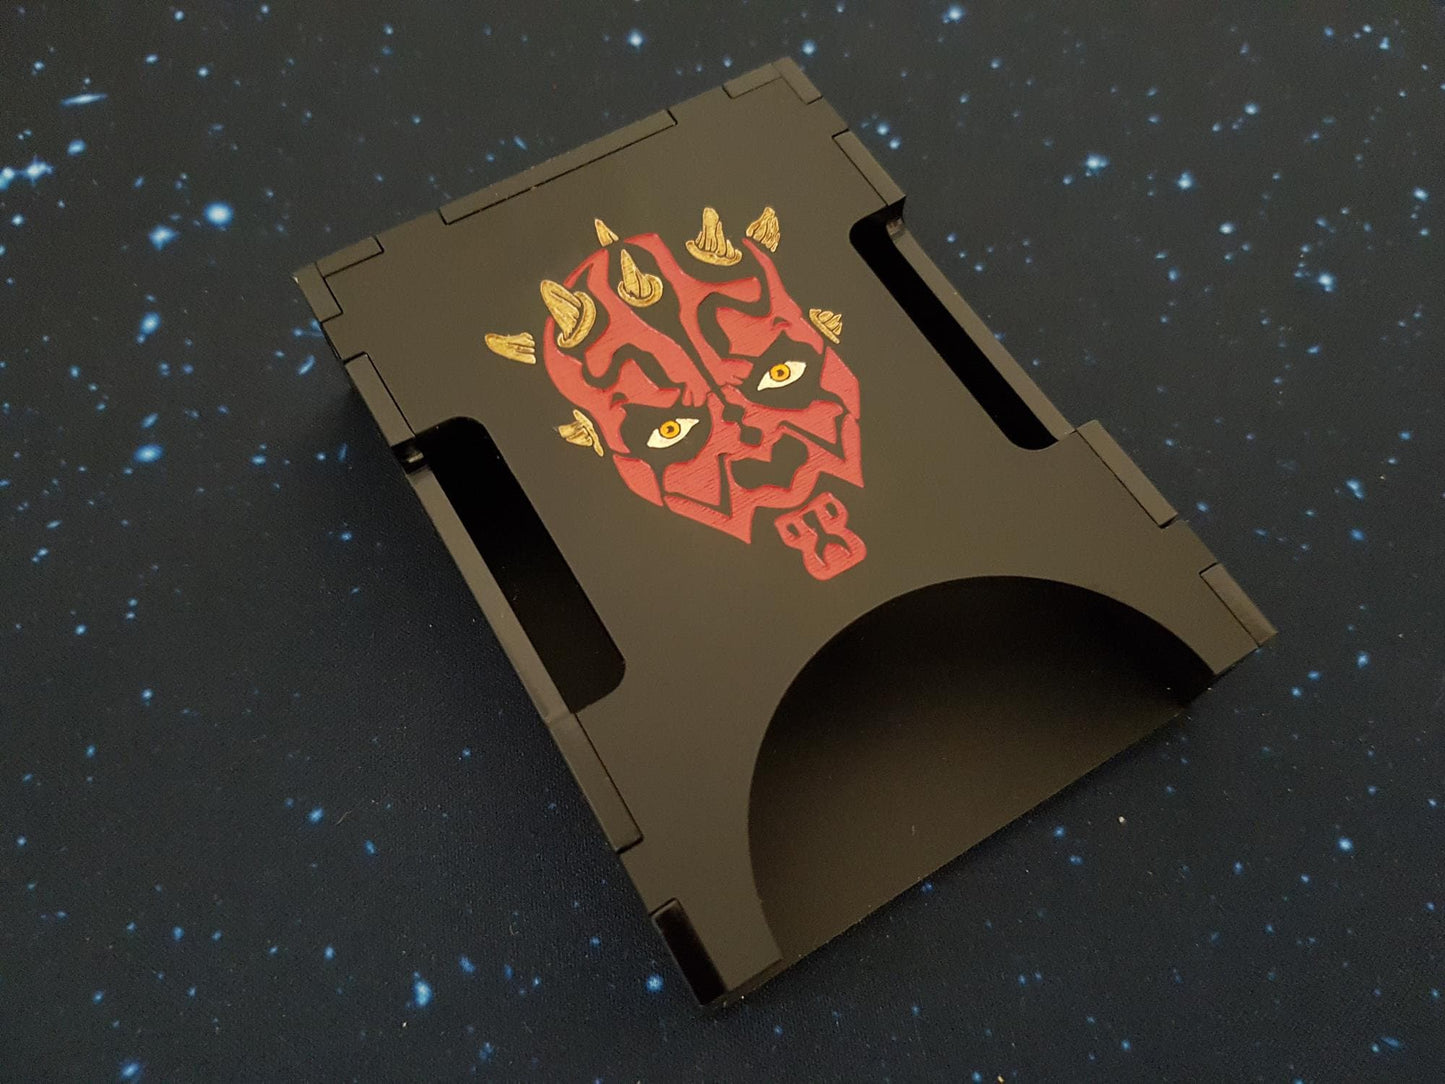 V2 Black Matt Acrylic Colour Printed and Engraved Darth Maul Collection *LIMITED EDITION 2* for Star Wars X-Wing